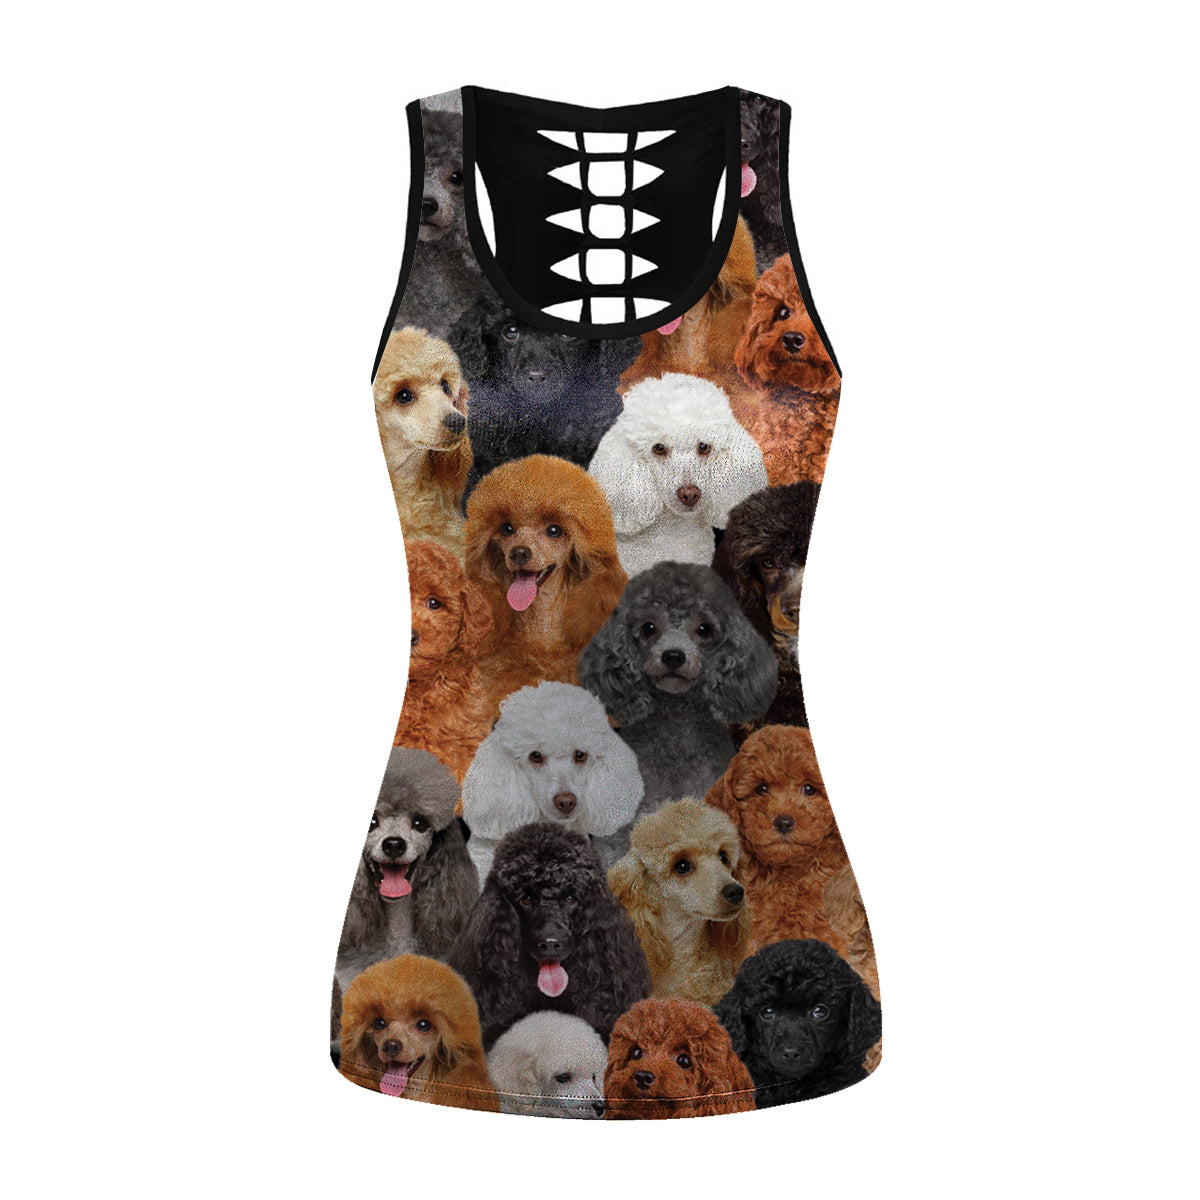 You Will Have A Bunch Of Poodles - Hollow Tank Top V1